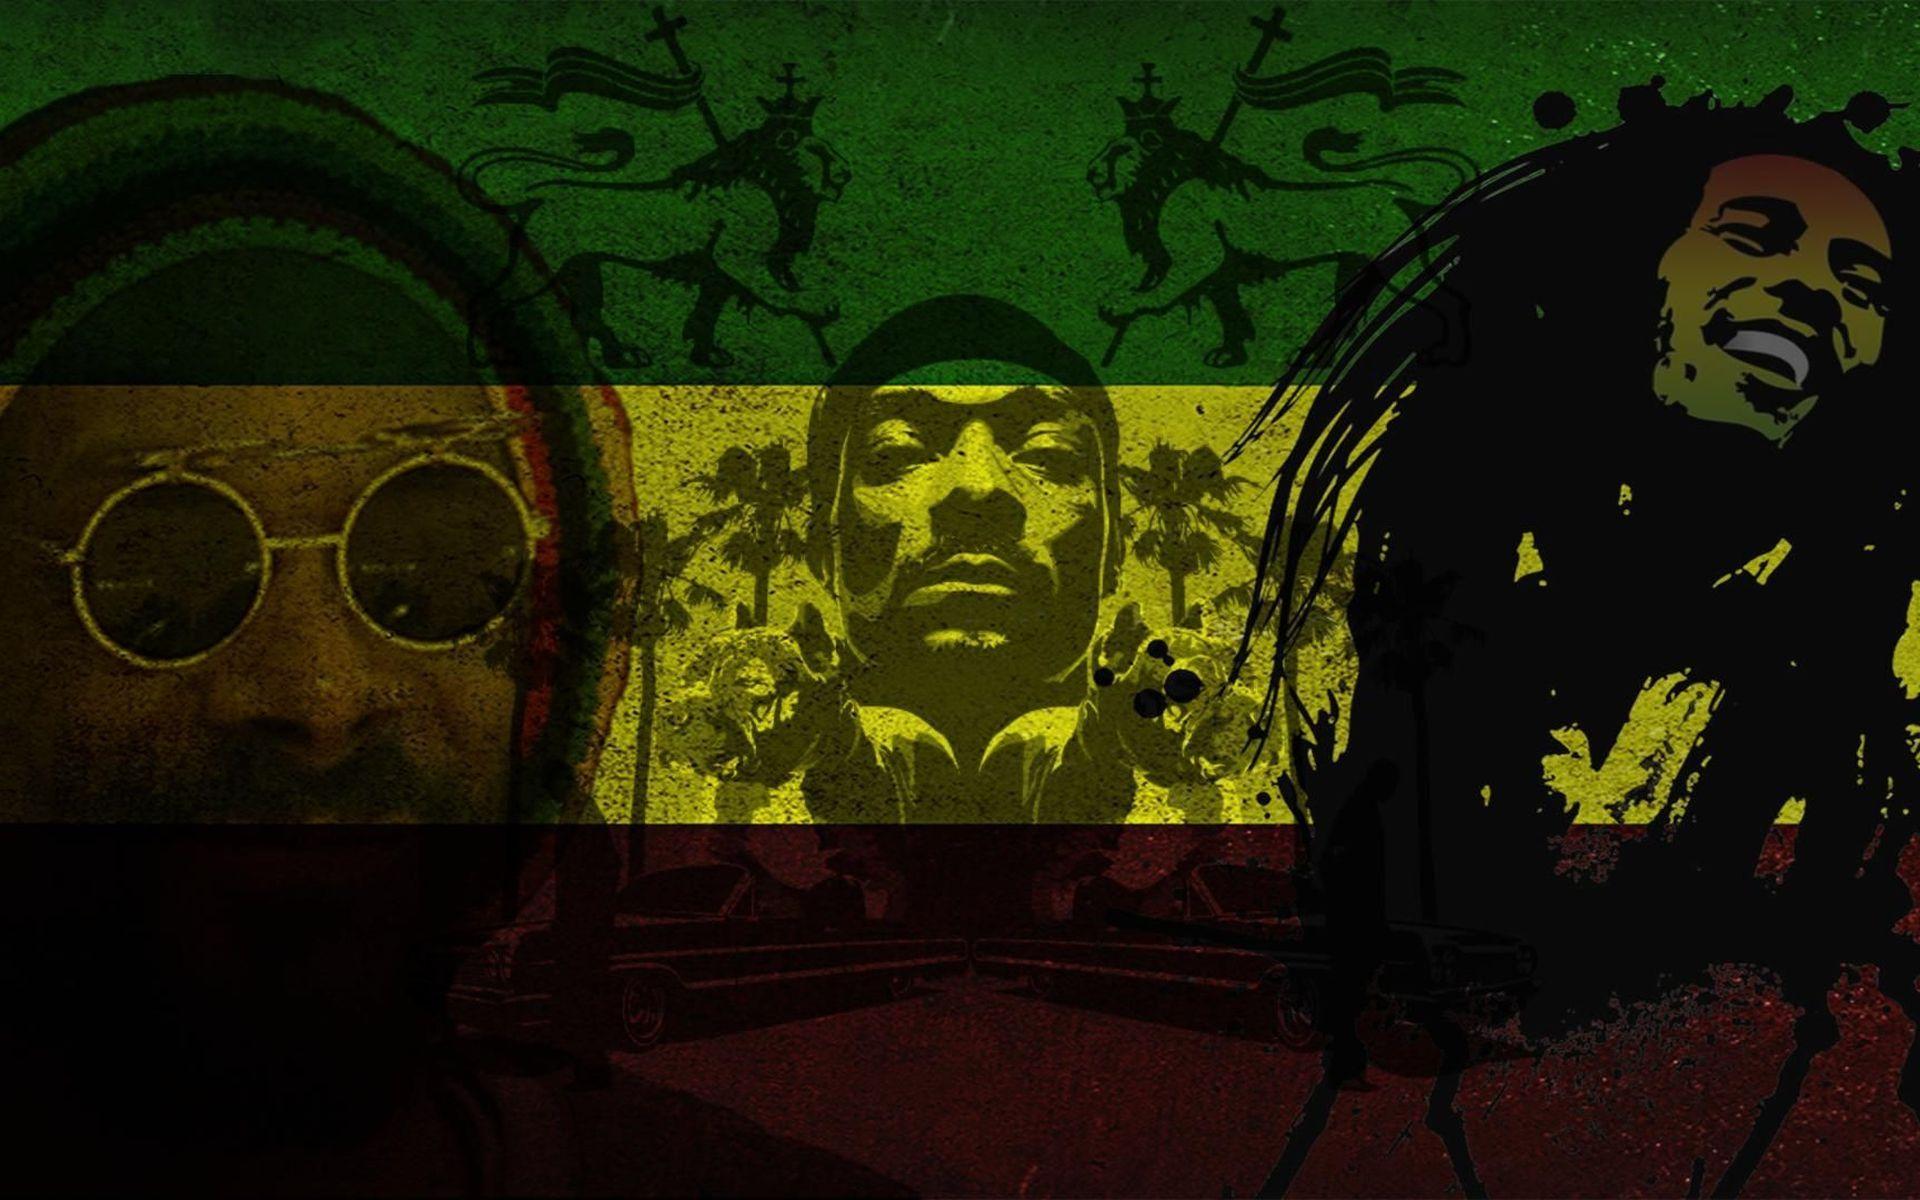 Reggae Wallpaper for Android Free Download on MoboMarket. HD